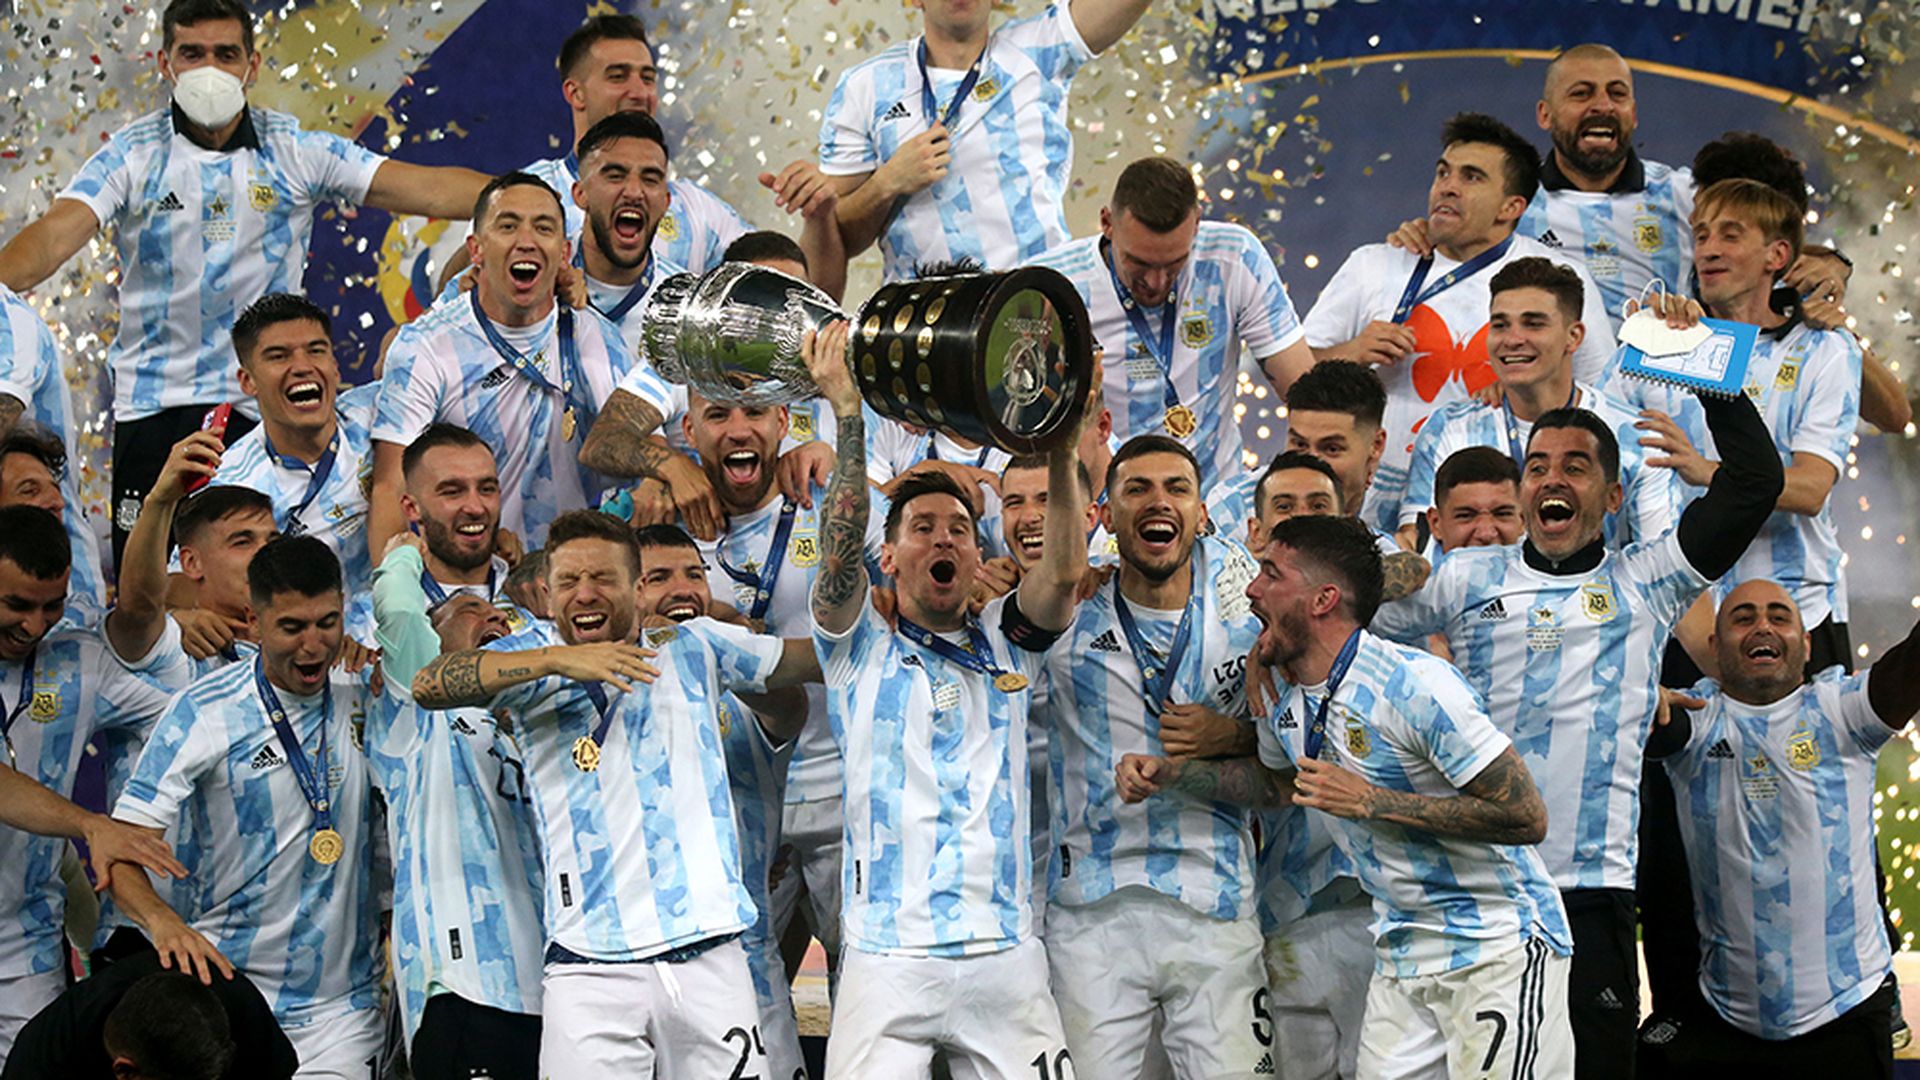 RIO DE JANEIRO, BRAZIL - JULY 10: Lionel Messi Captain of Argentina lift the Conmebol Copa America Trophy with Teammates after winning the Final of Copa America Brazil 2021 ,during the Final Match between Brazil and Argentina at Maracana Stadium on July 10, 2021 in Rio de Janeiro, Brazil. (Photo by 